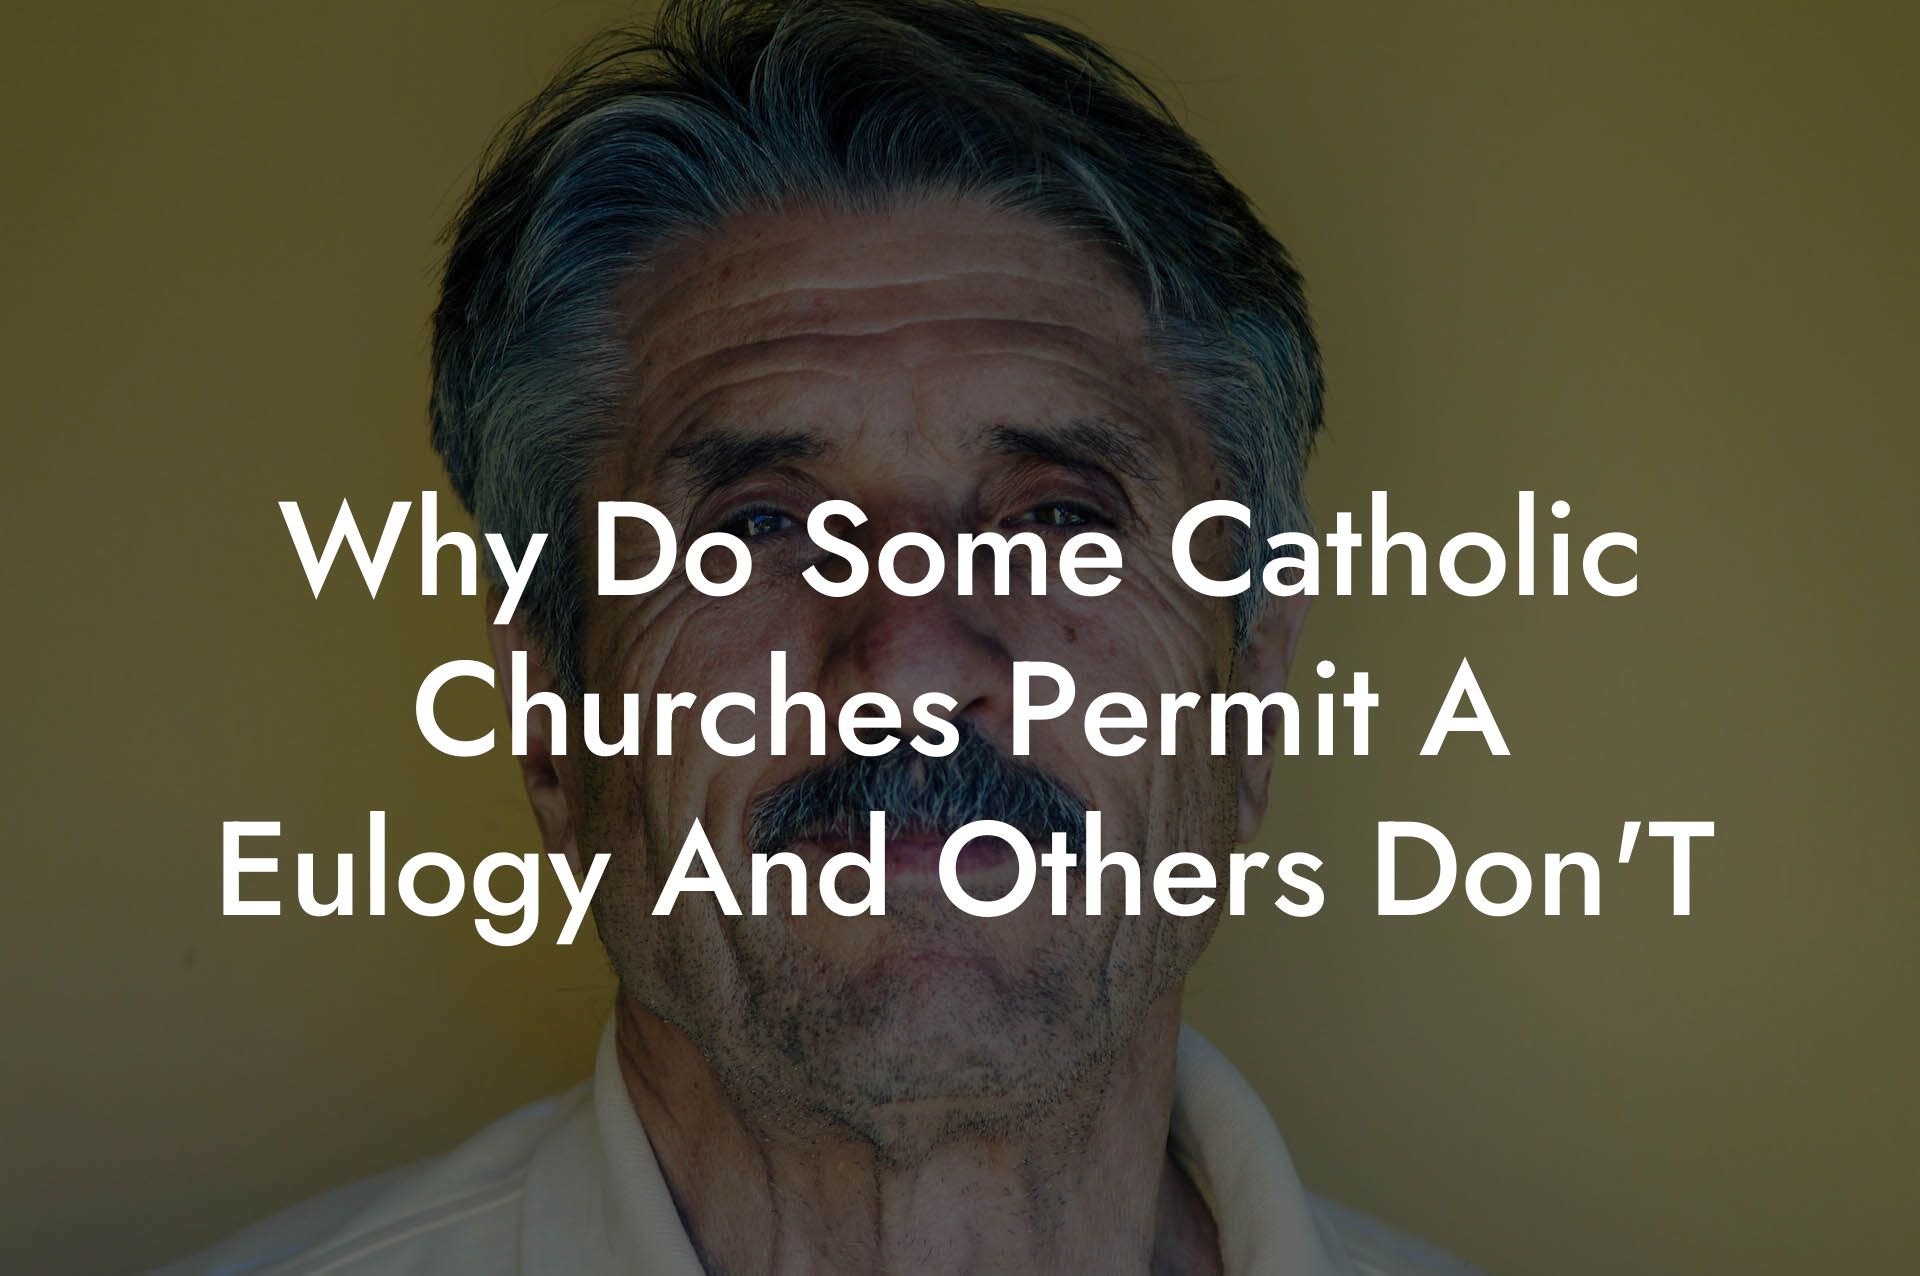 Why Do Some Catholic Churches Permit A Eulogy And Others Don'T